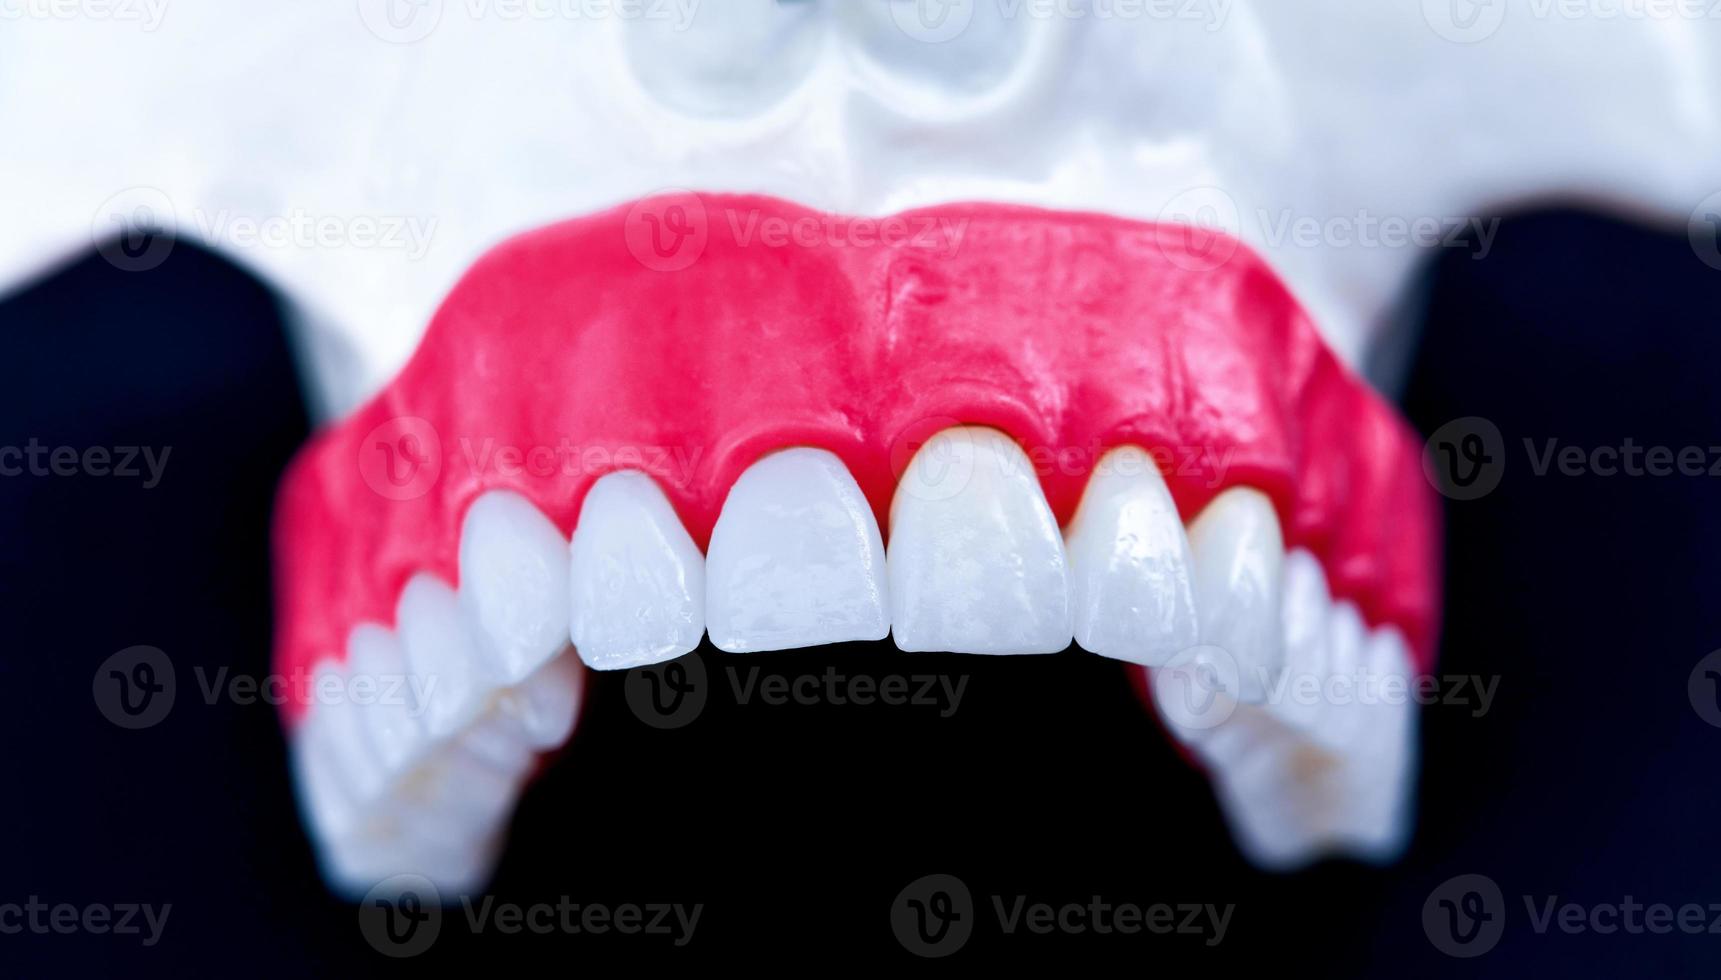 Upper human jaw with teeth and gums anatomy model photo